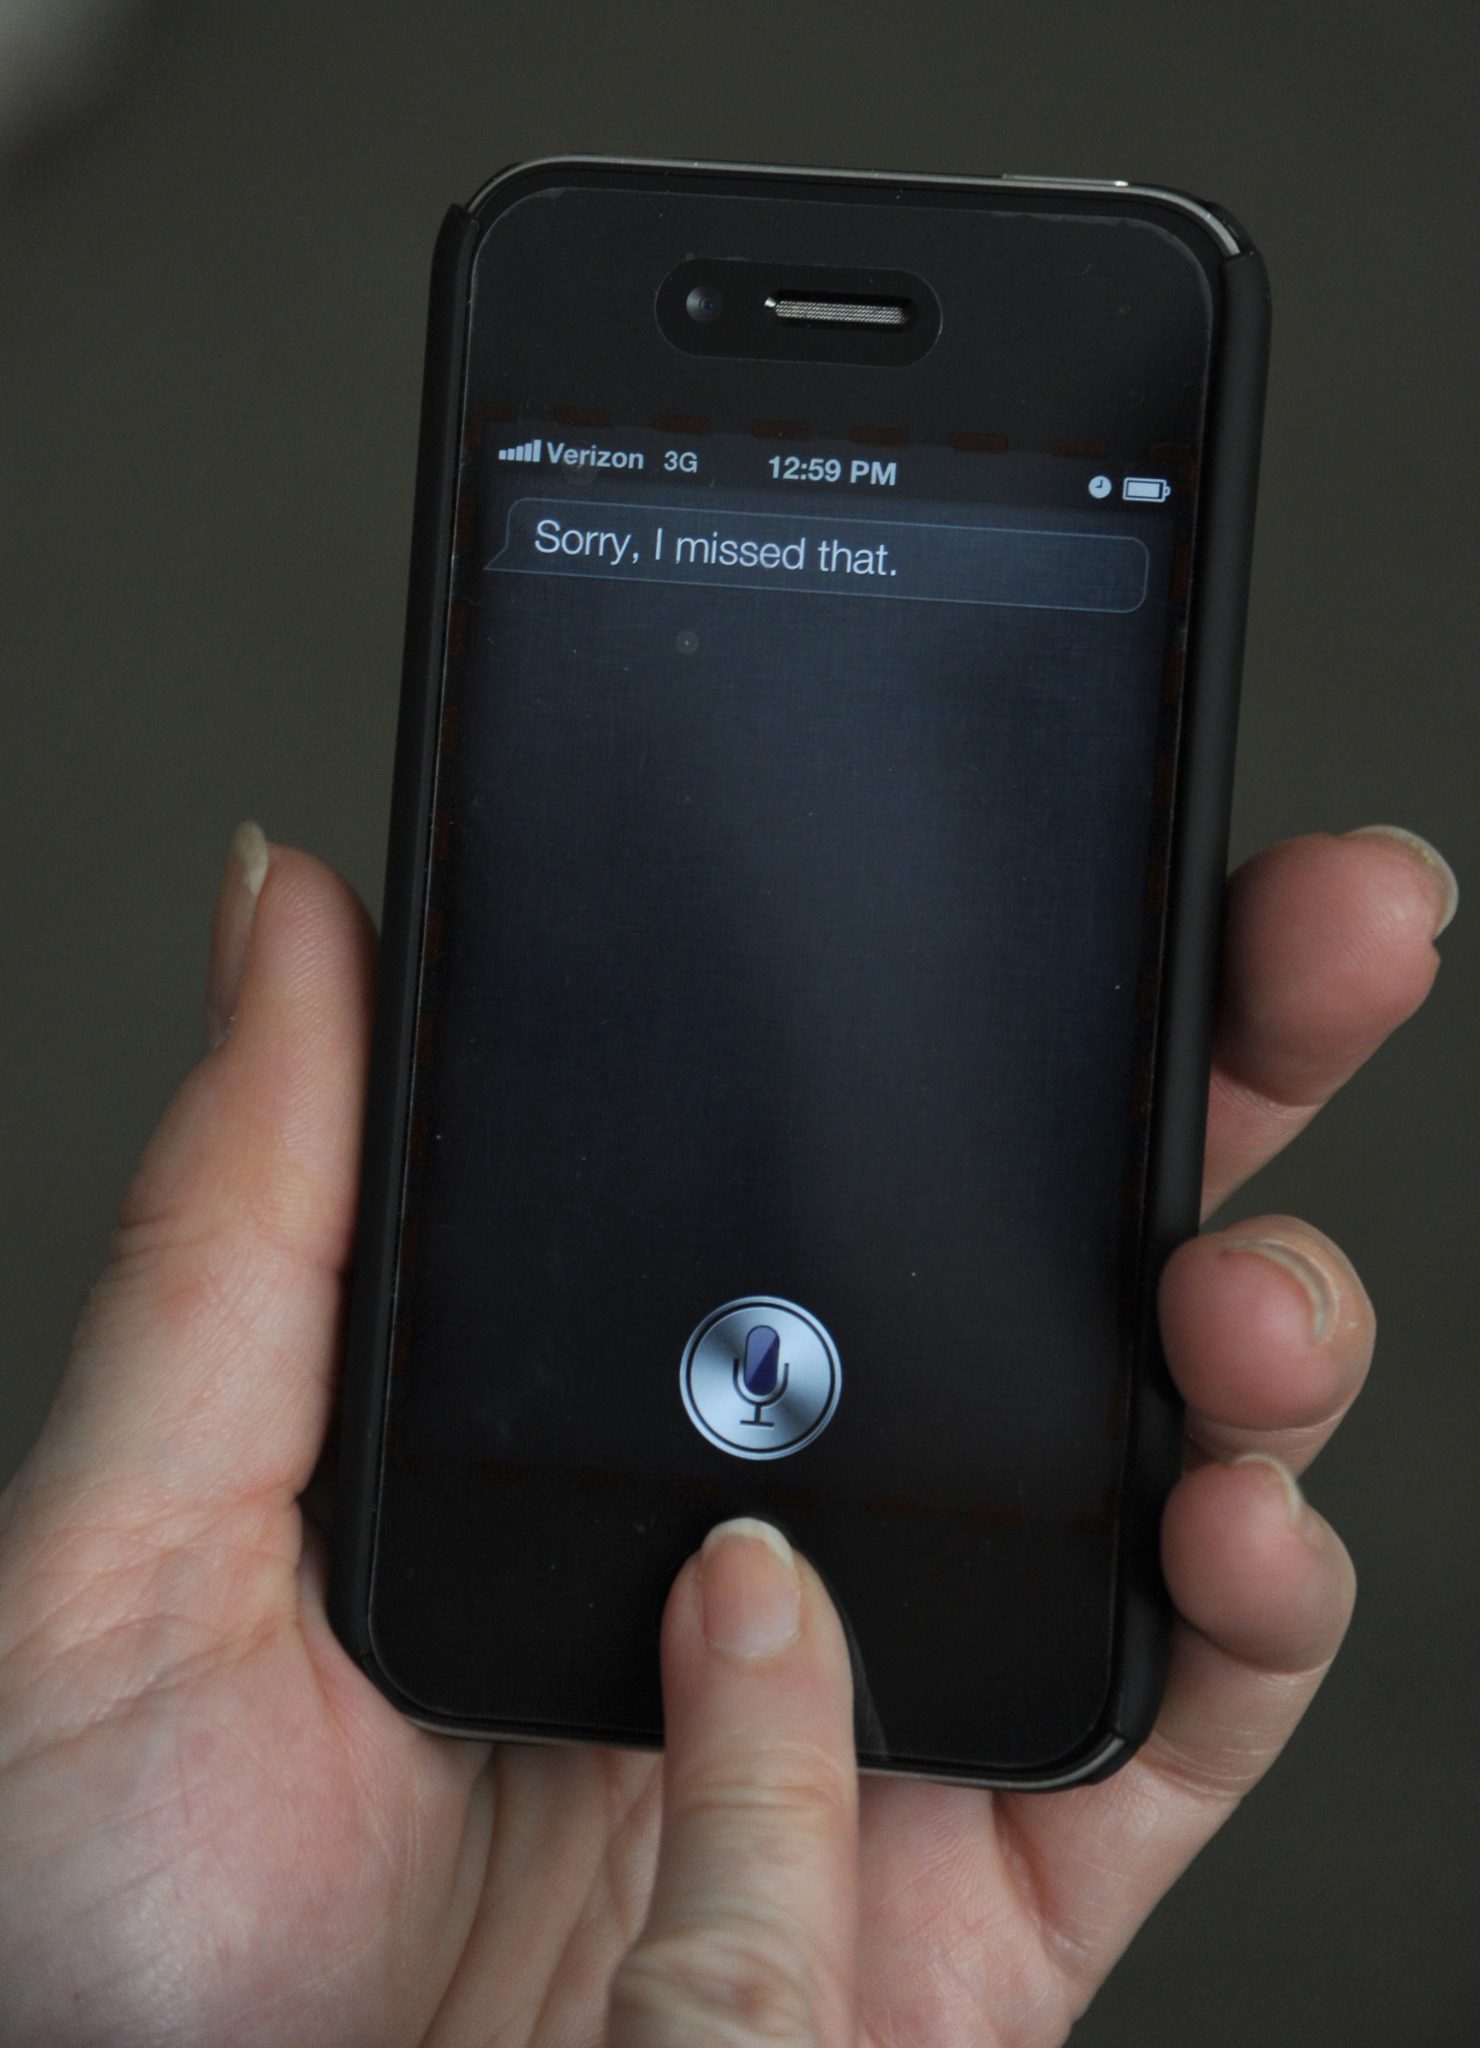 hal 9000 voice for siri